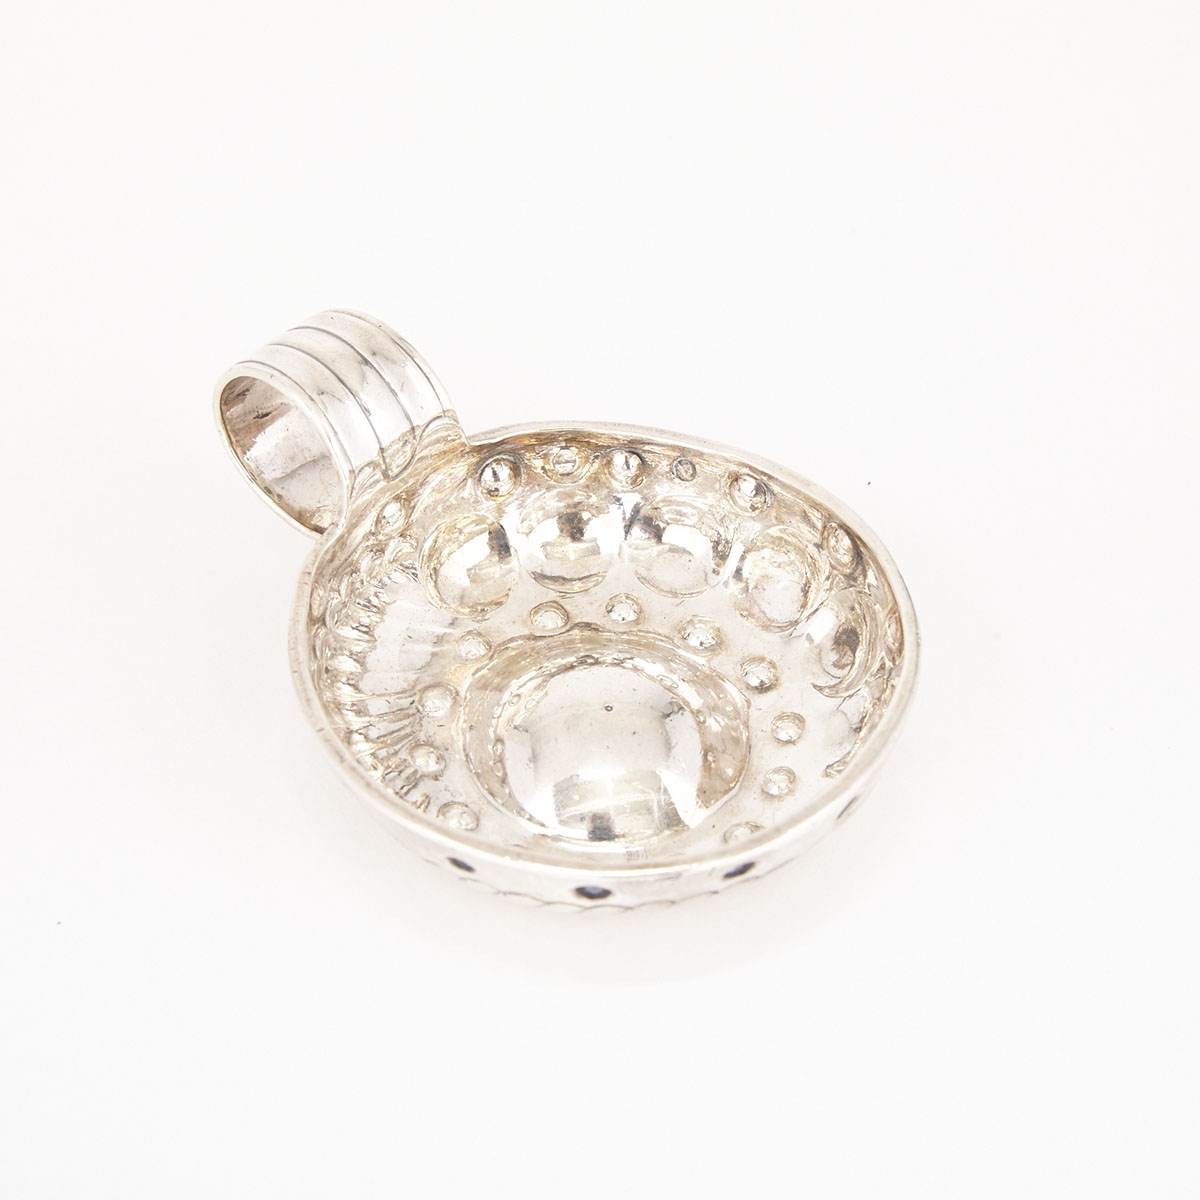 French Silver Wine Taster, Paris, 1819-38